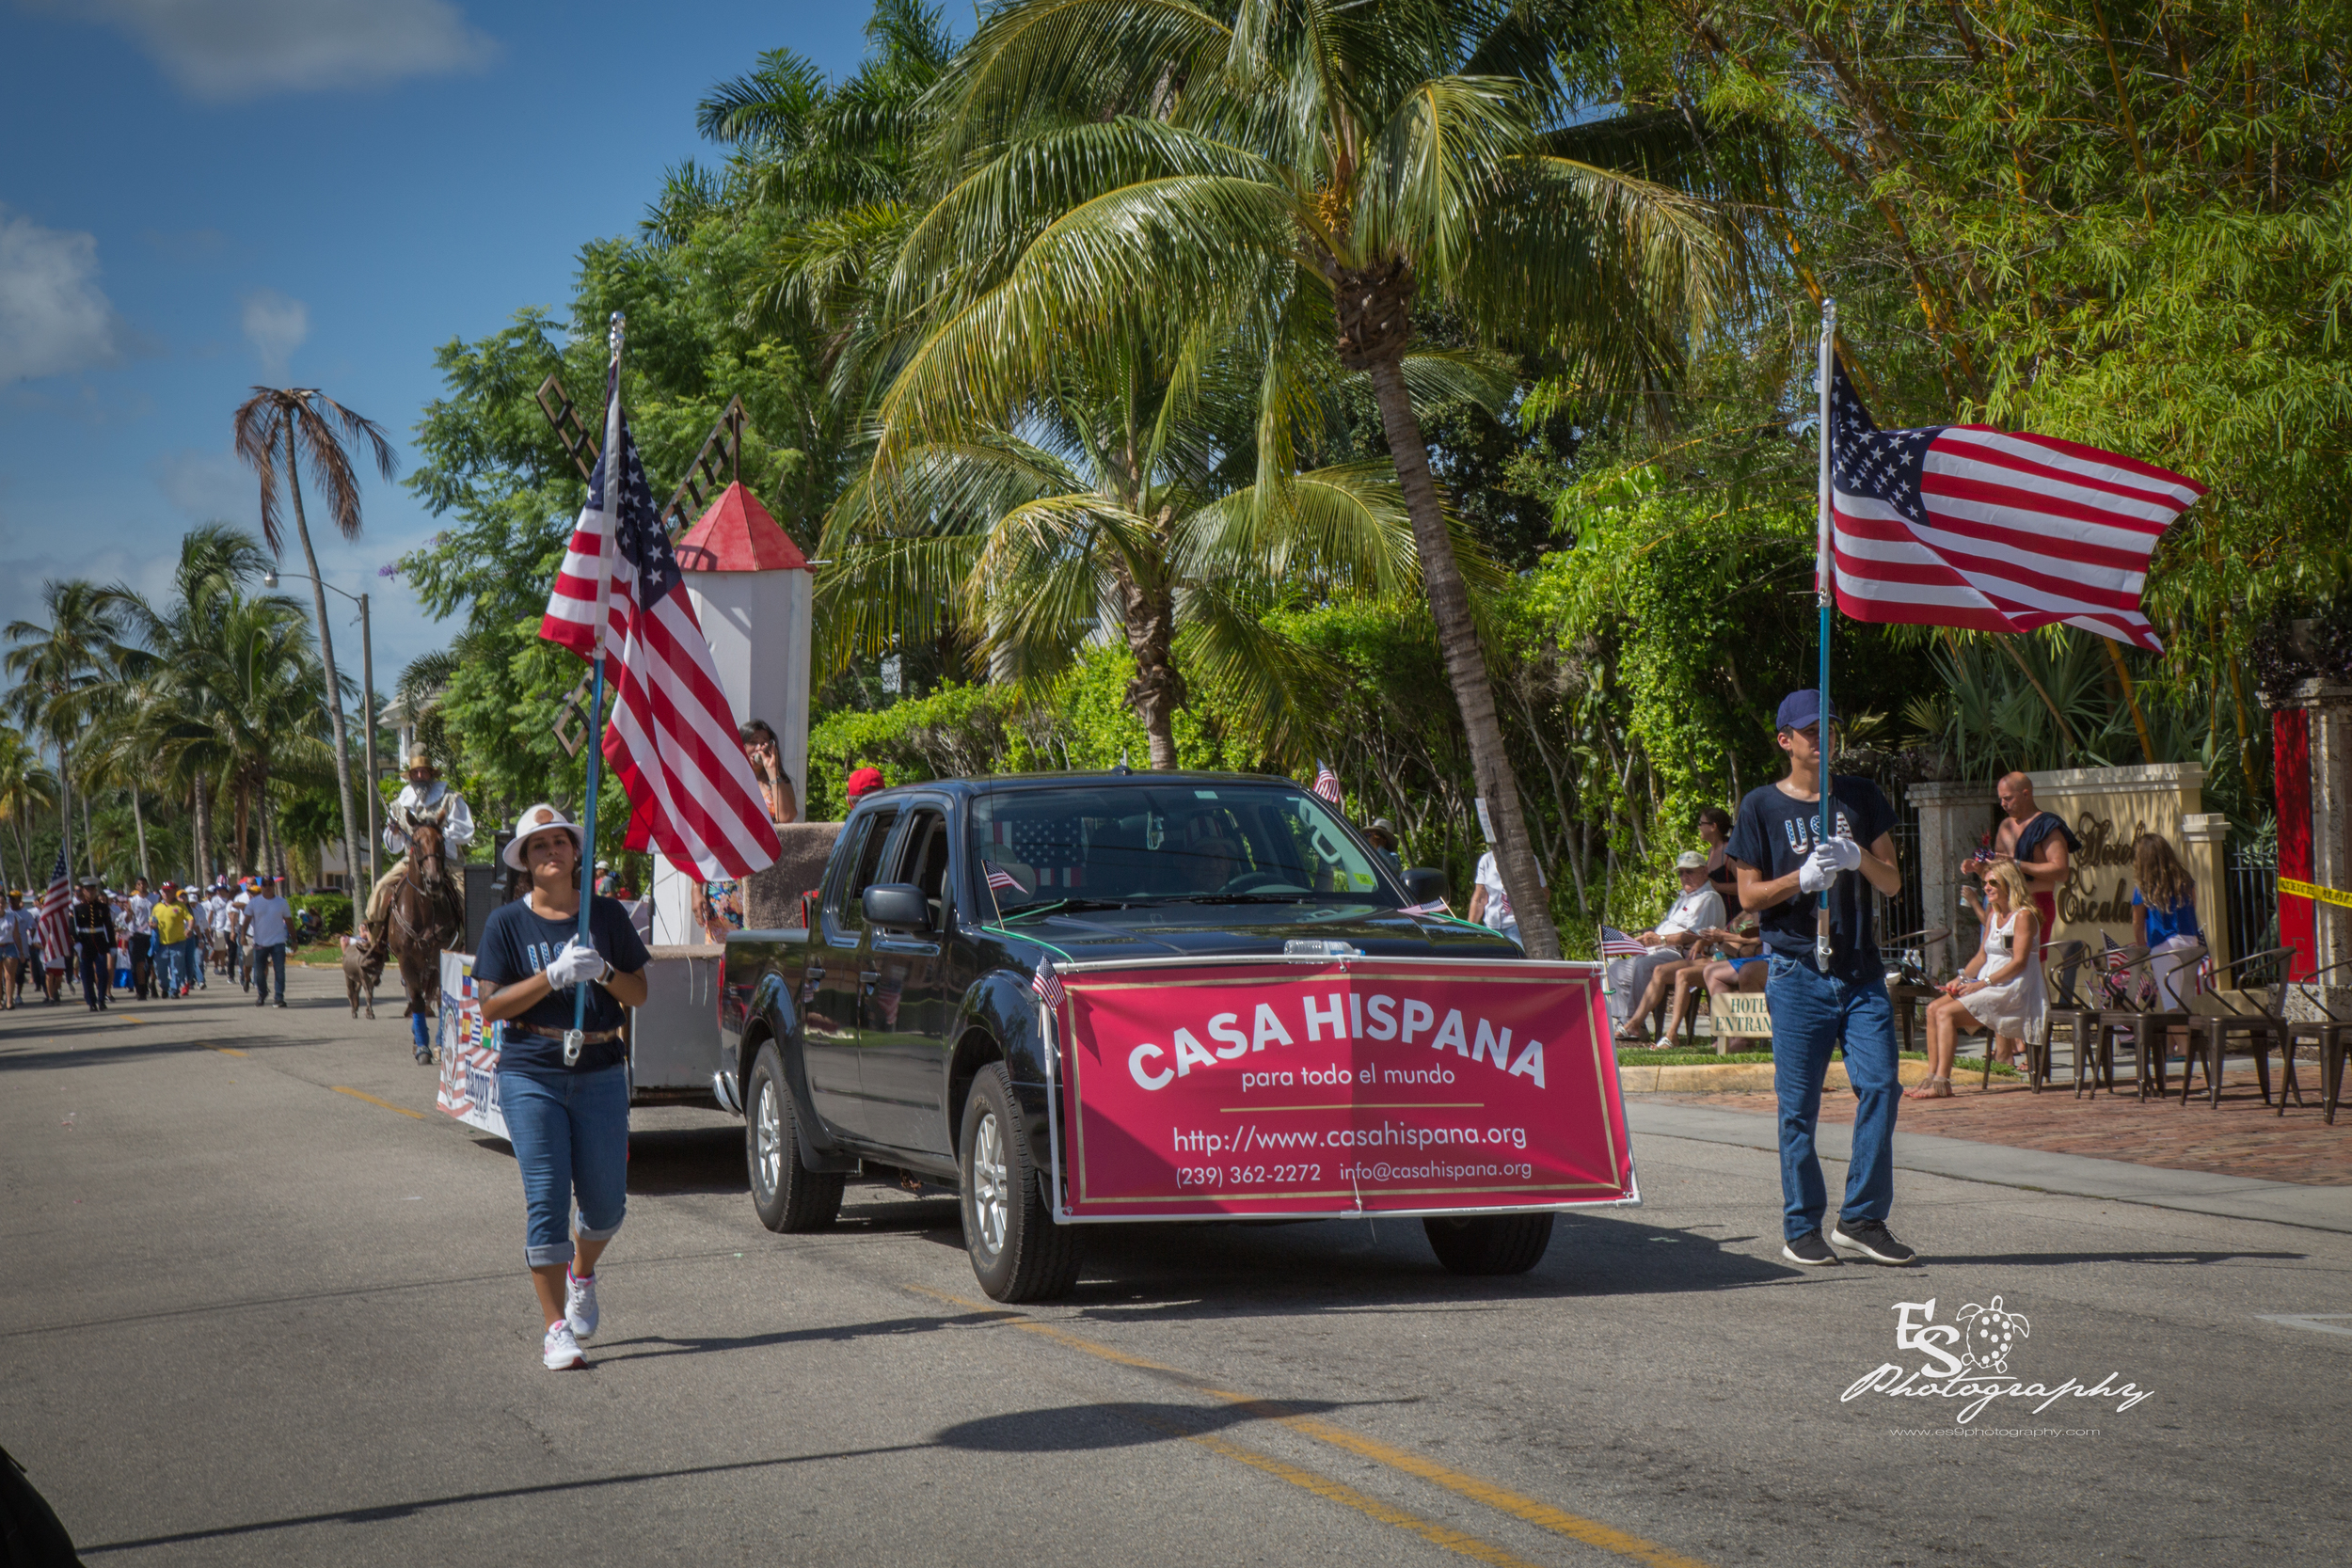 City of Naples July 4th Parade 2016 @ ES9 Photography 2016-106.jpg